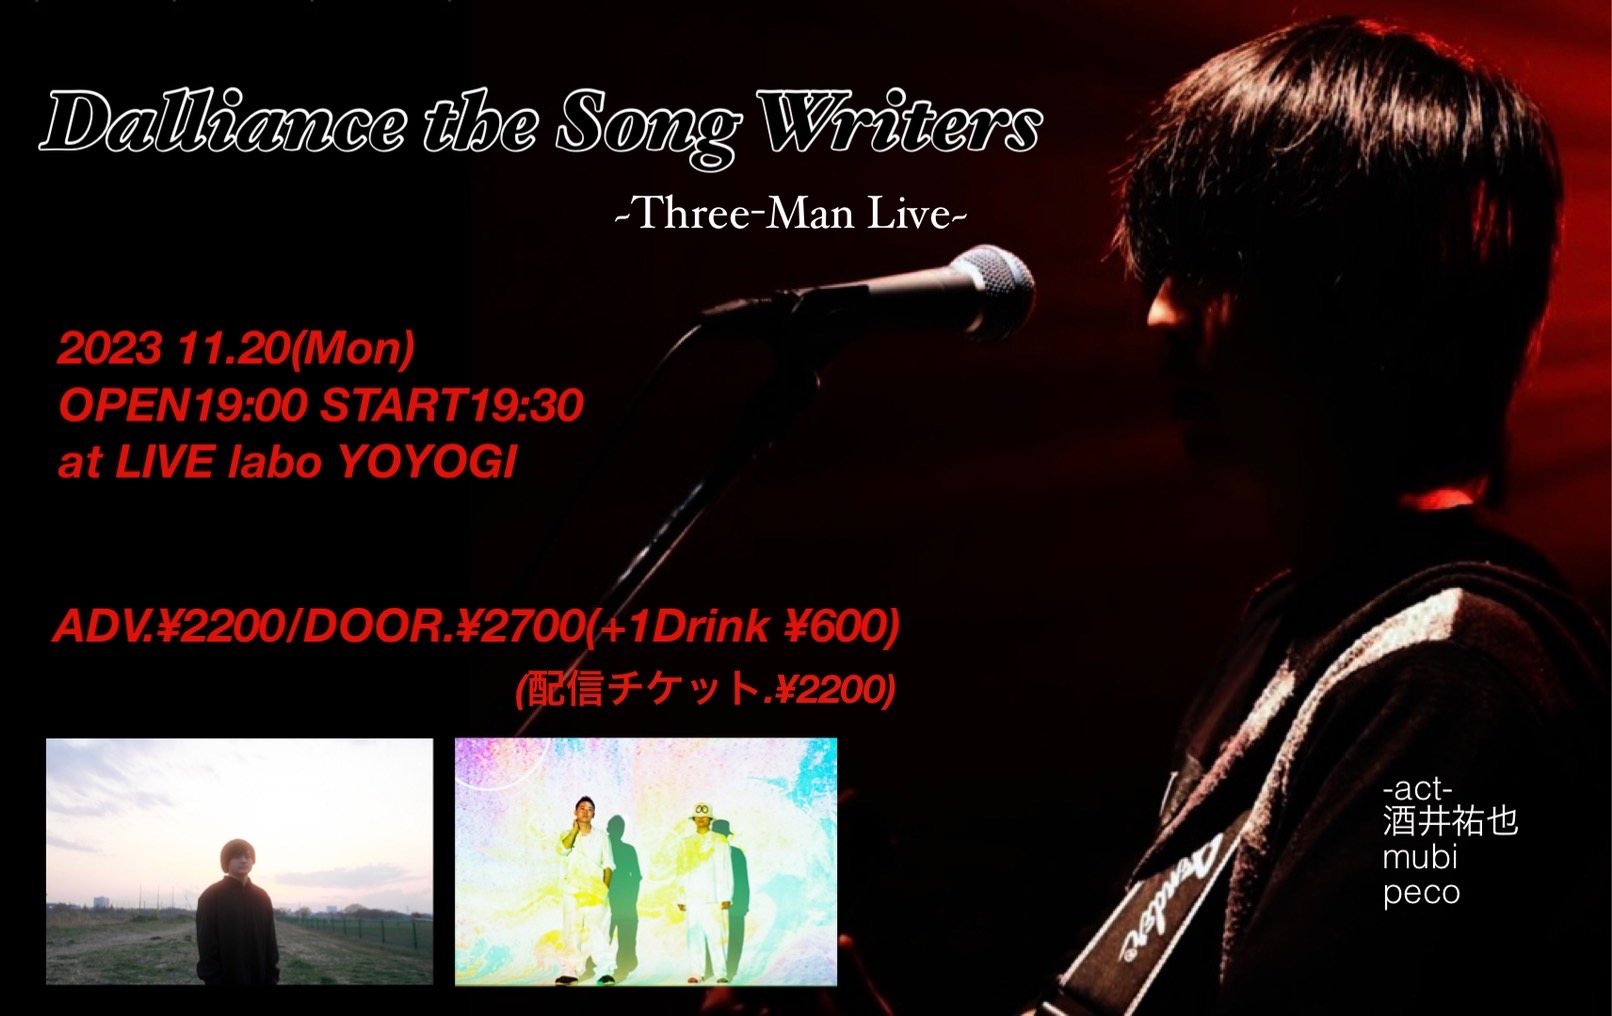 ～labo 19th Anniversary!!～
Dalliance the Song Writers -Three-Man Live-